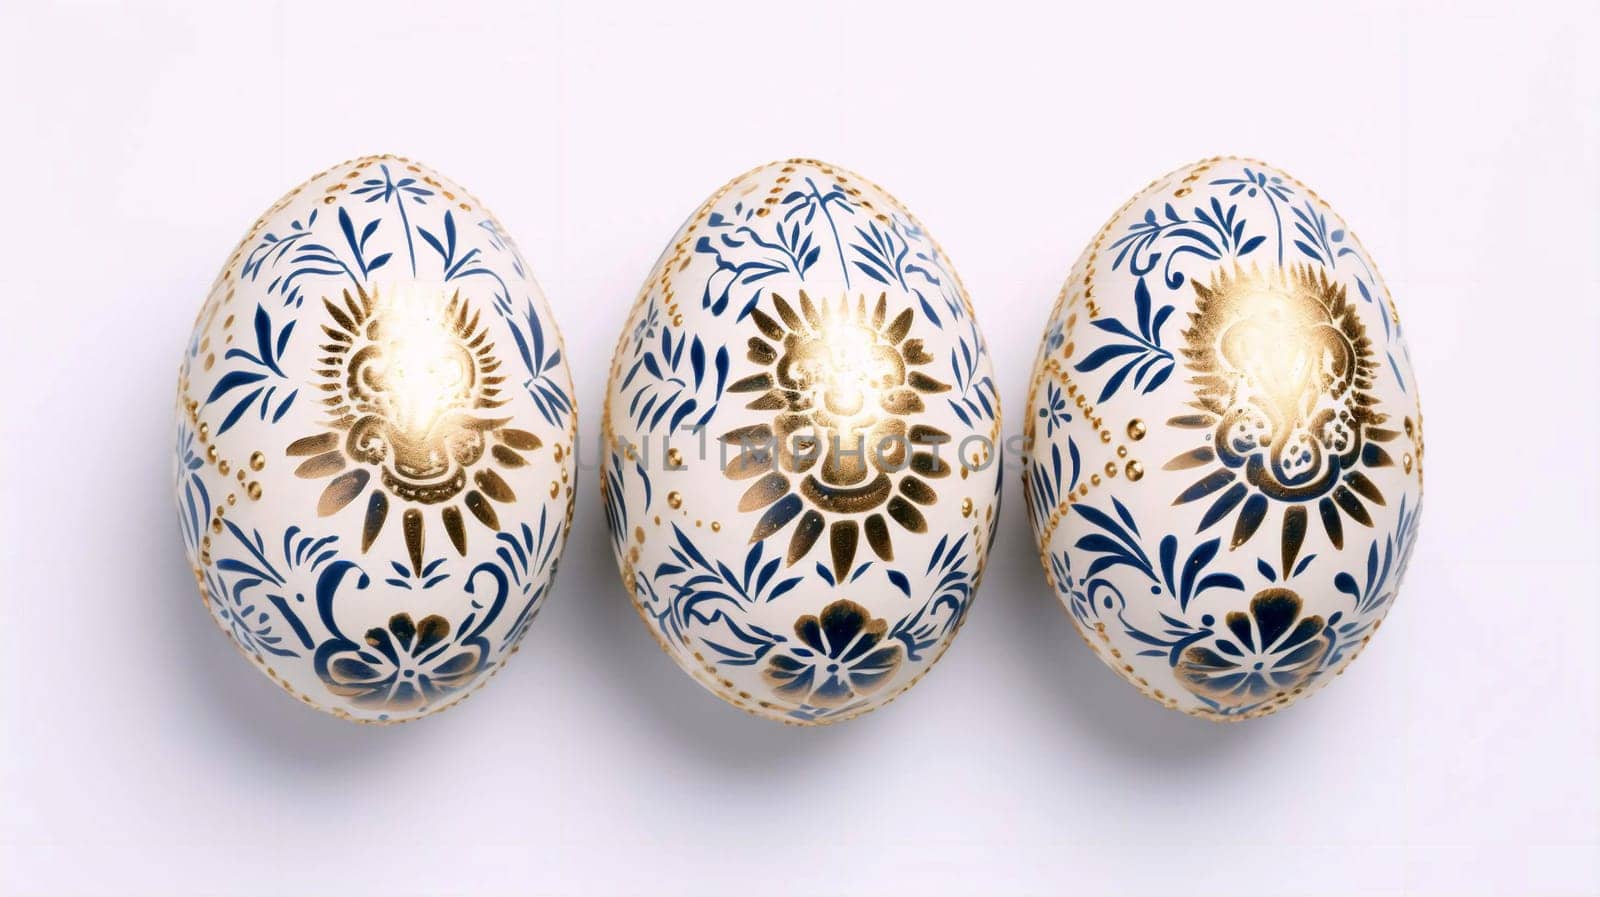 three Easter eggs with a blue and gold pattern on a white background, top view by Севостьянов